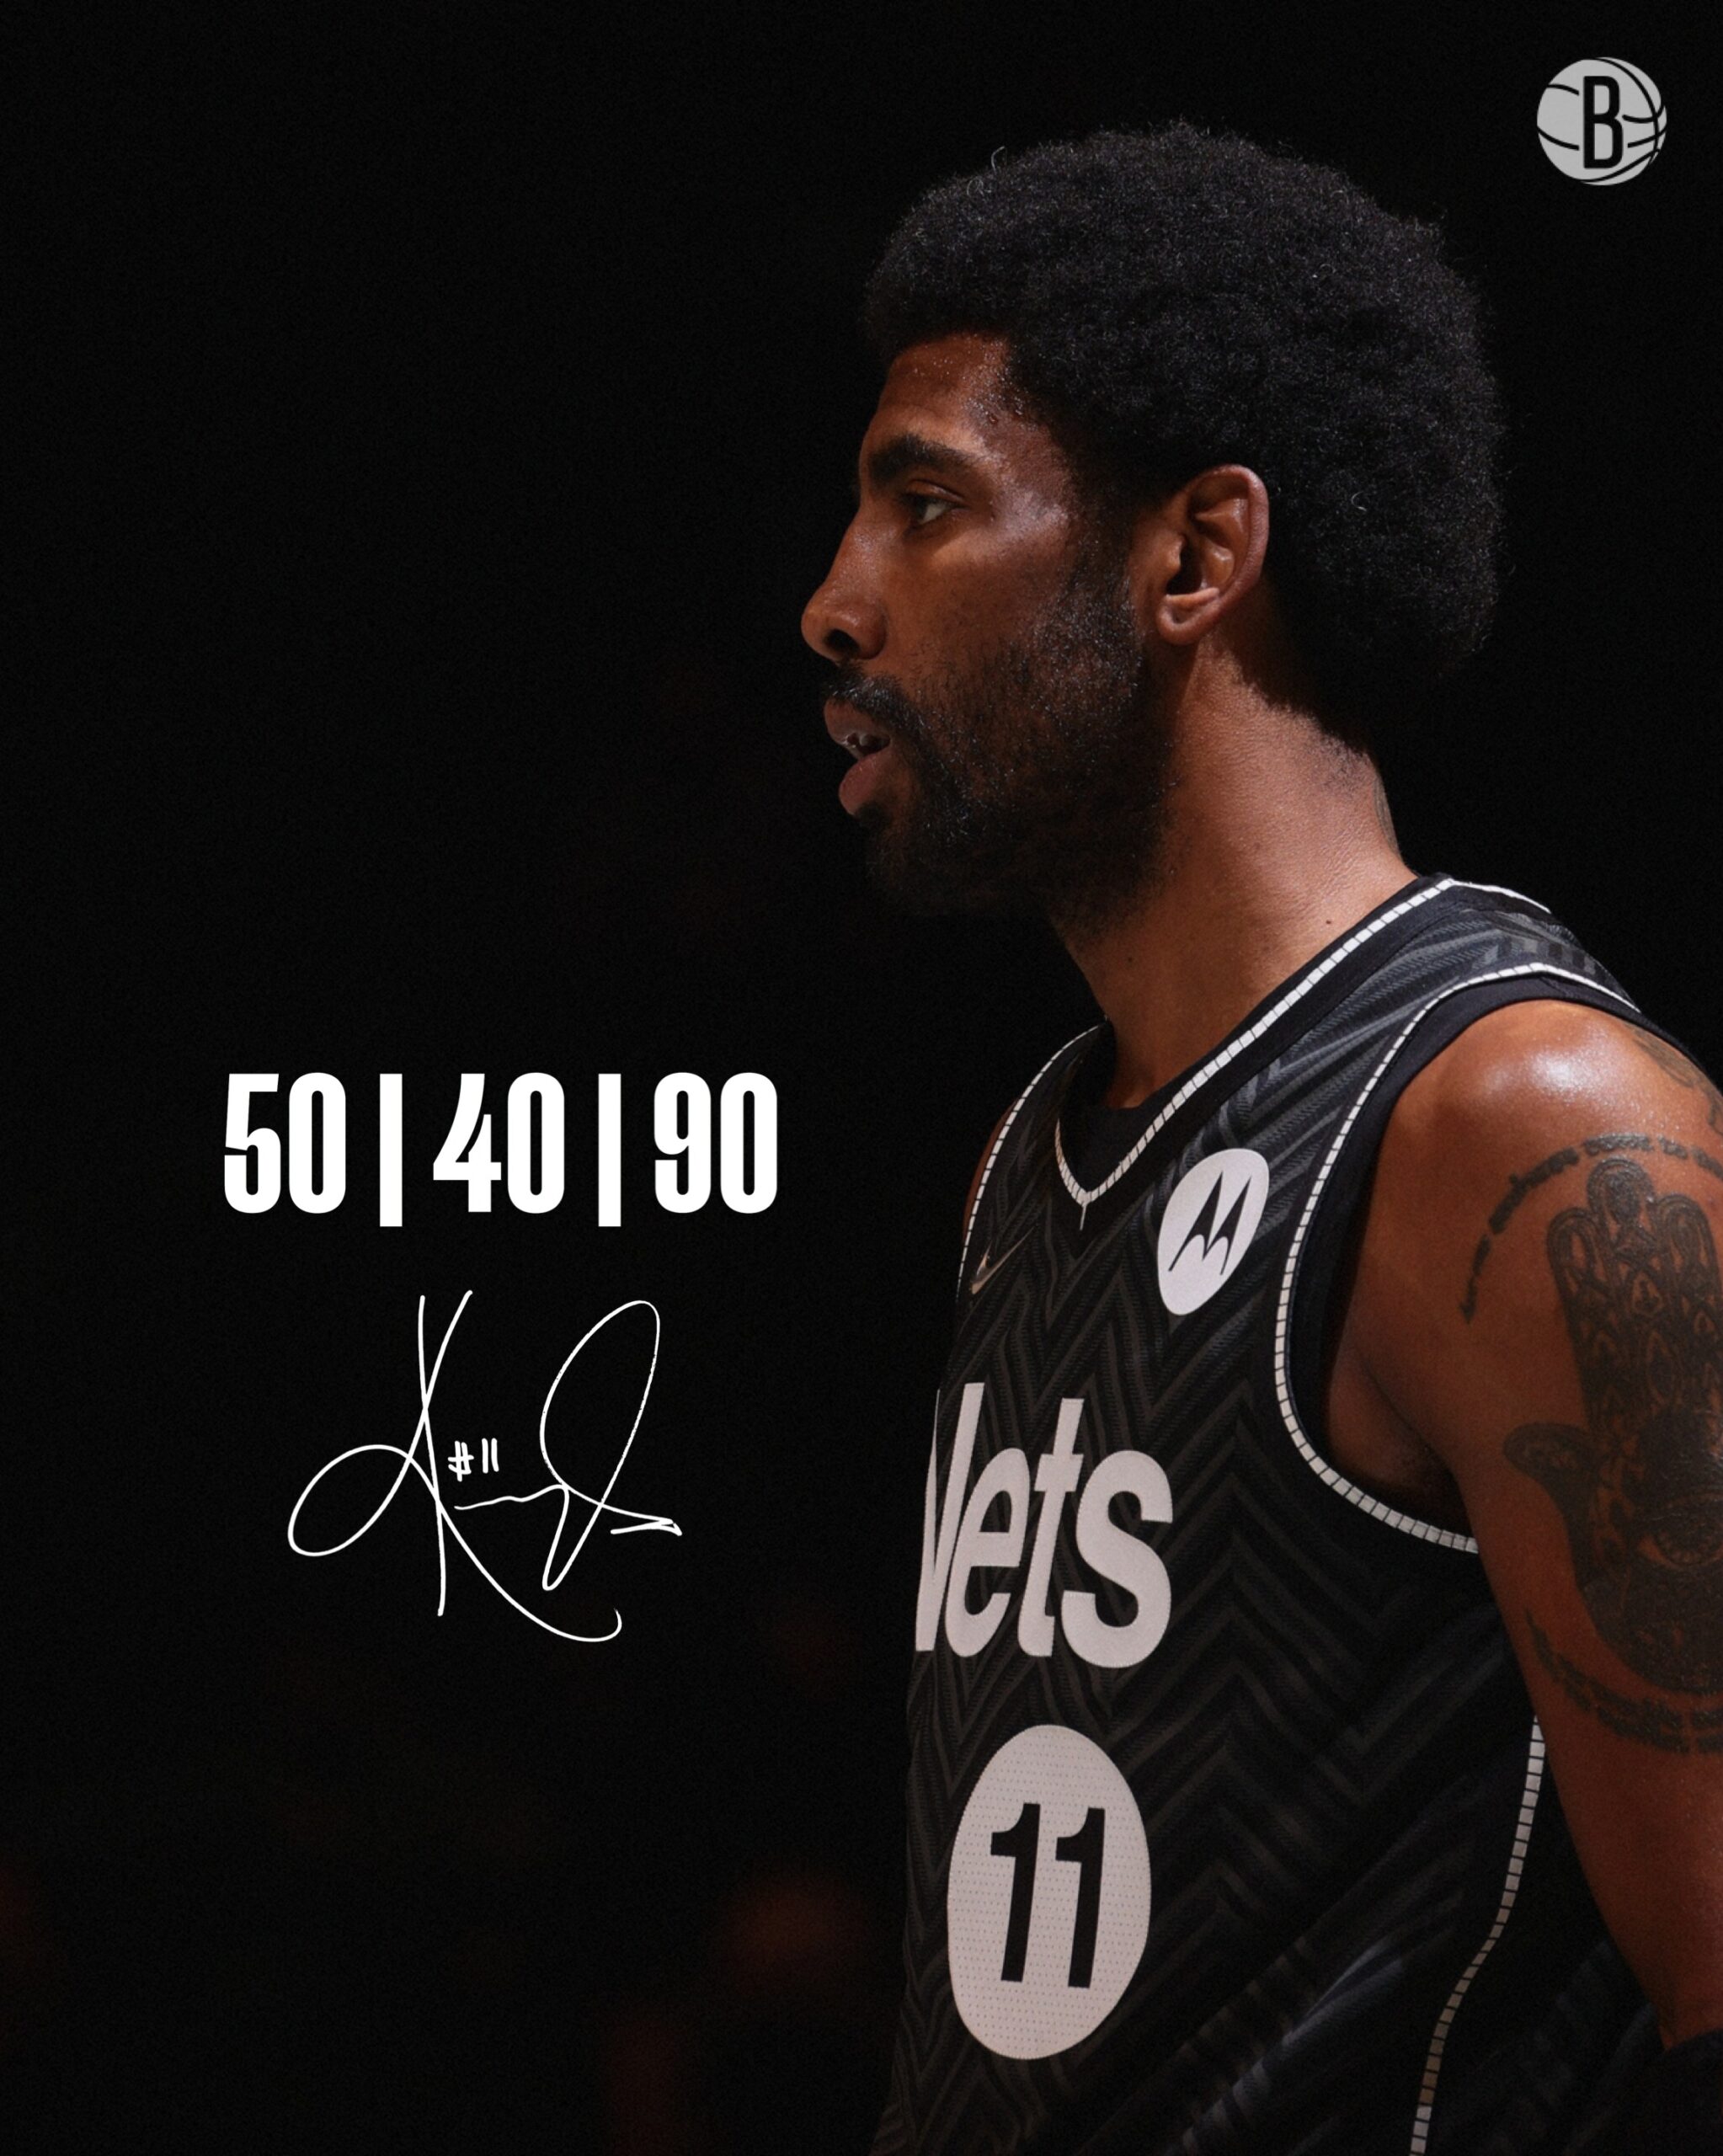 Kyrie Irving joins 50-40-90 club